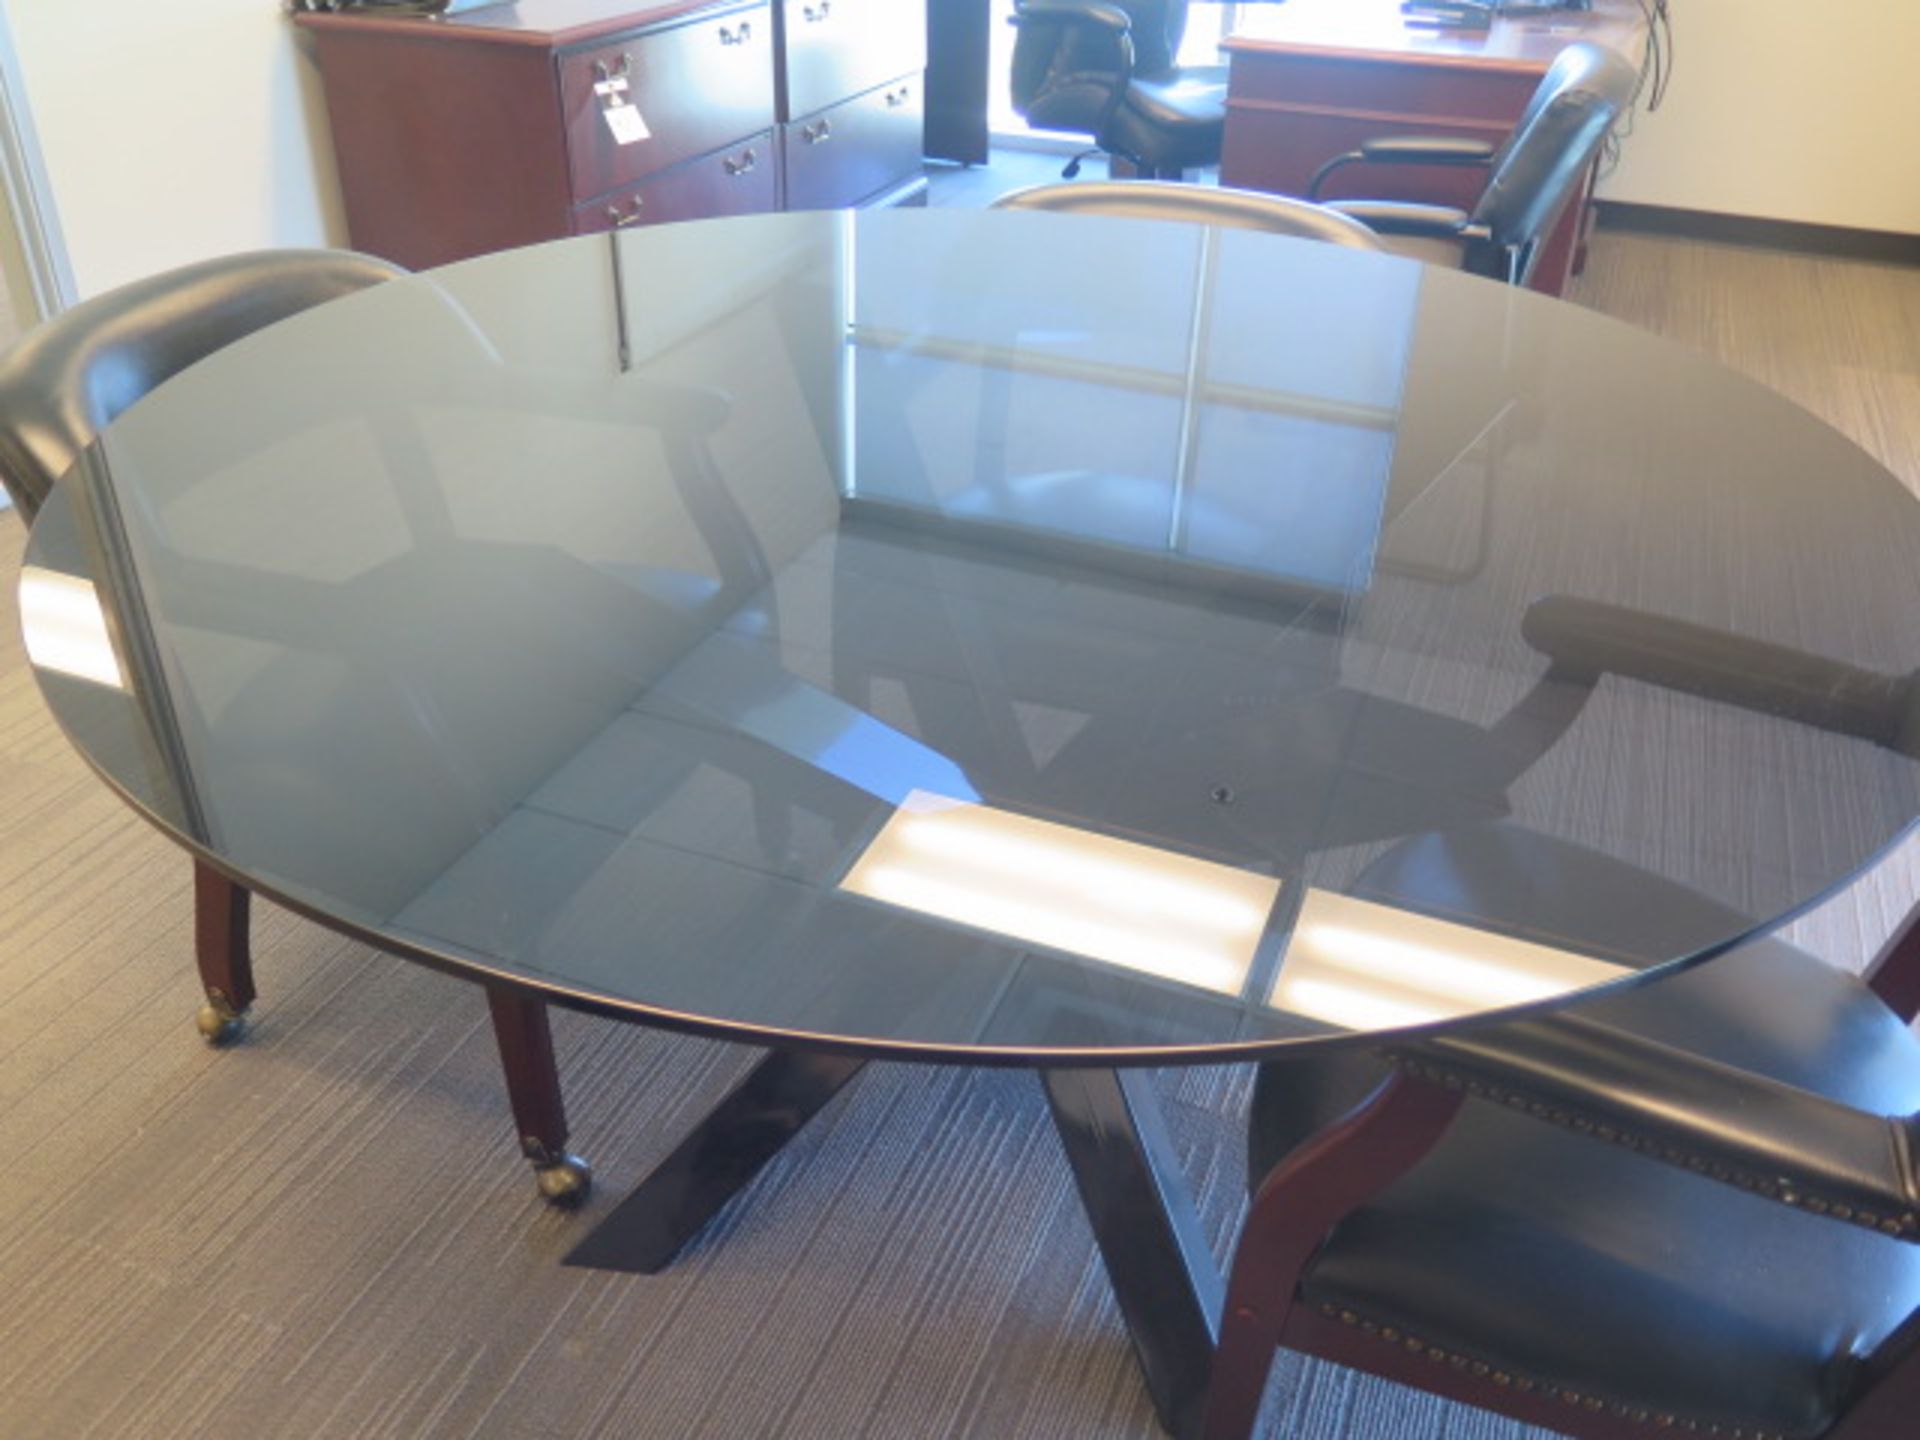 Glass Top Conference Table, Office Furniture, Book Shelves and Chairs (SOLD AS-IS - NO WARRANTY) - Image 2 of 9